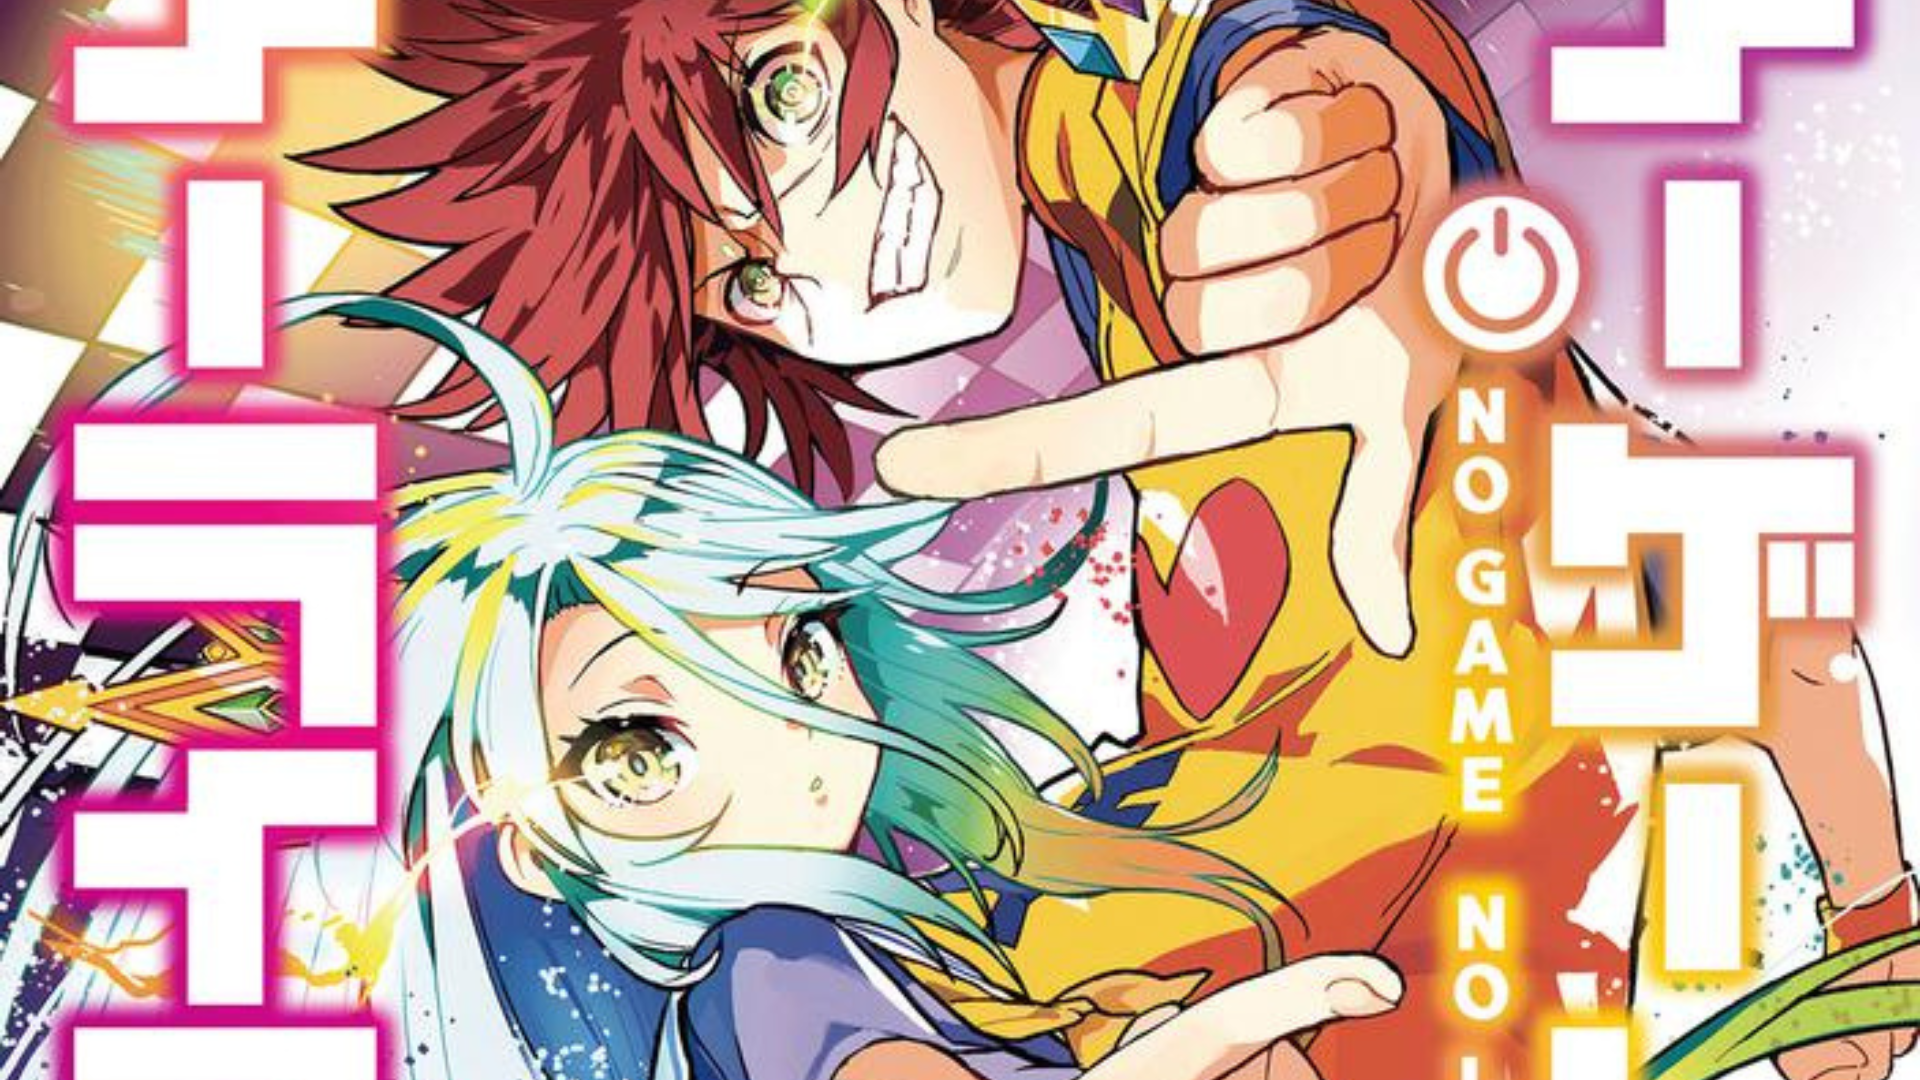 ICv2: It's 'No Game No Life' for 'Weiss Schwarz'